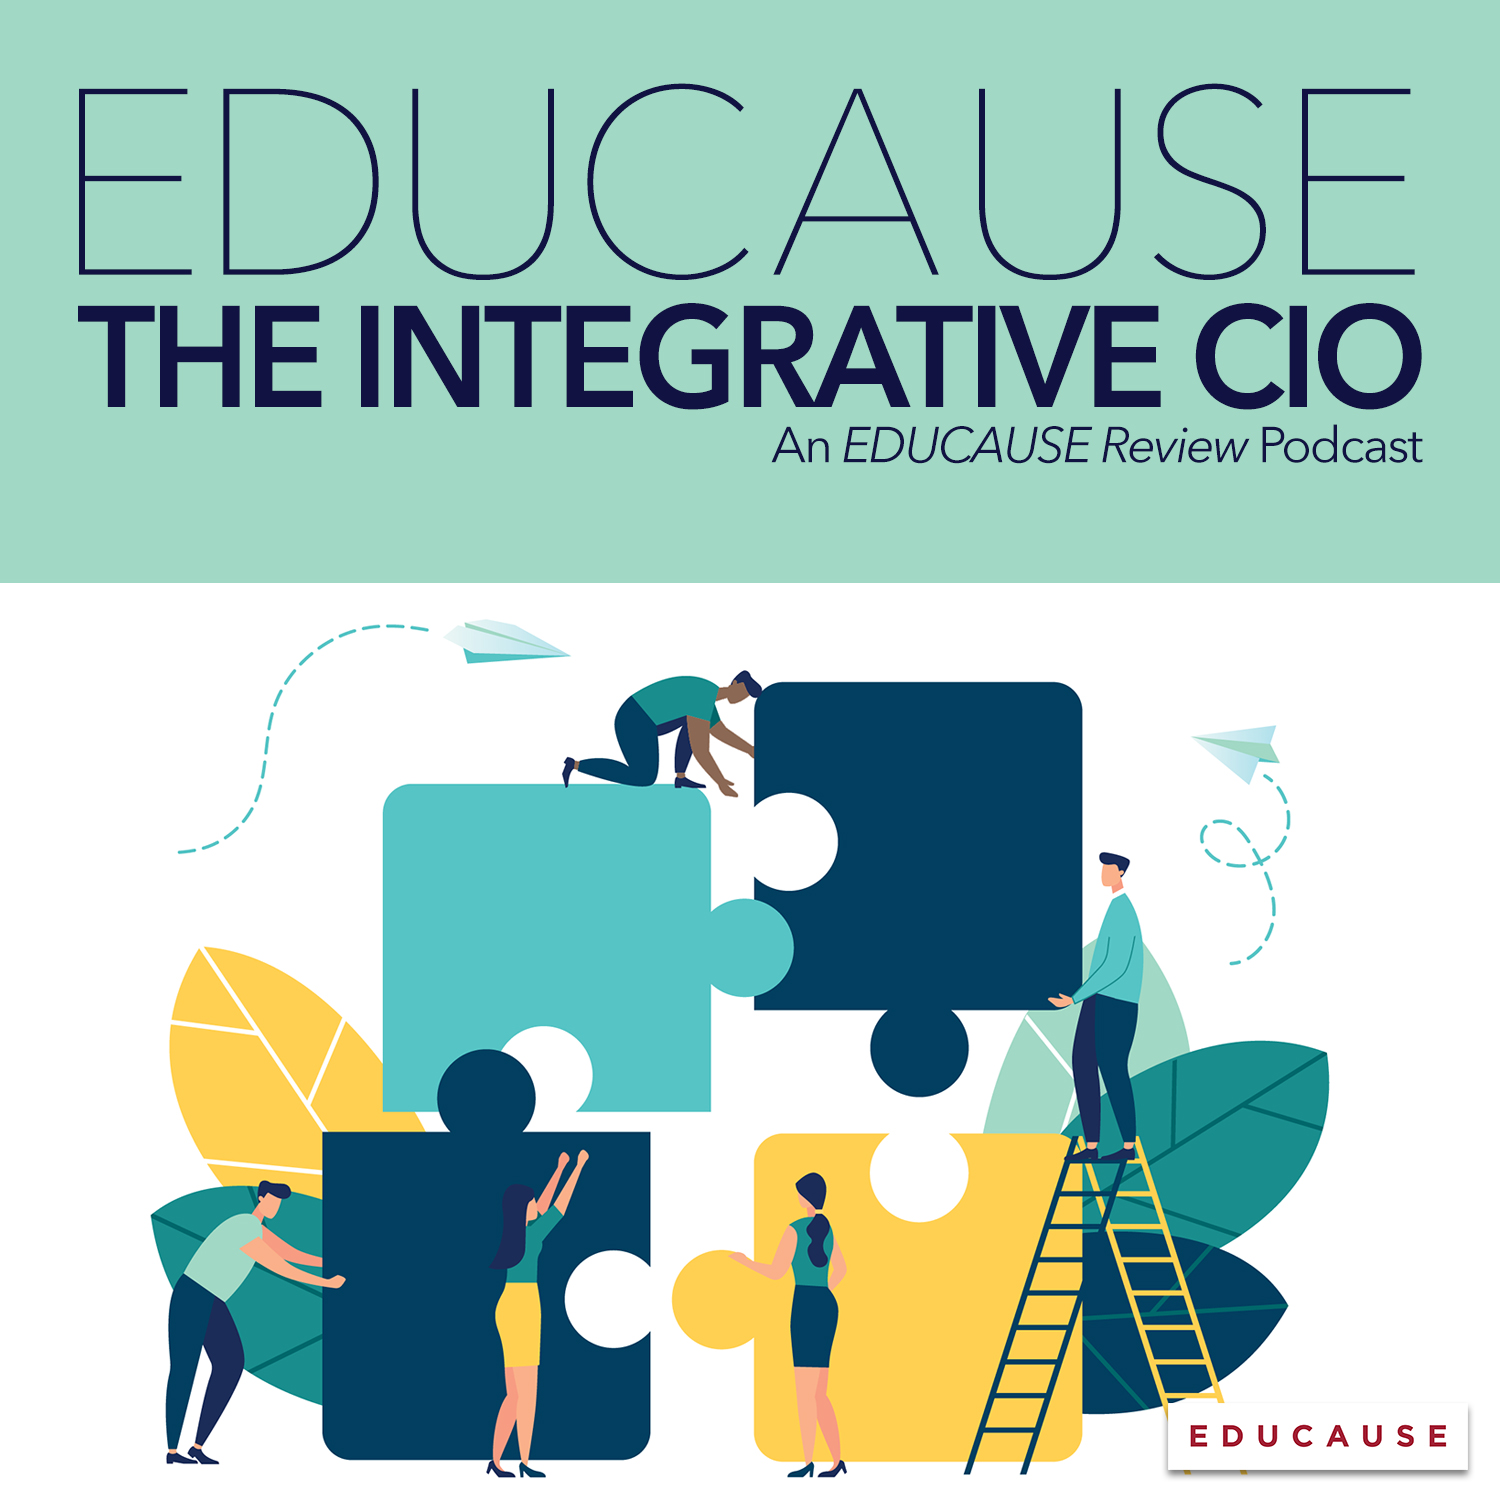 EDUCAUSE & The Integrative CIO | An EDUCAUSE Review Podcast | Artwork with illustrations of people connecting puzzle pieces